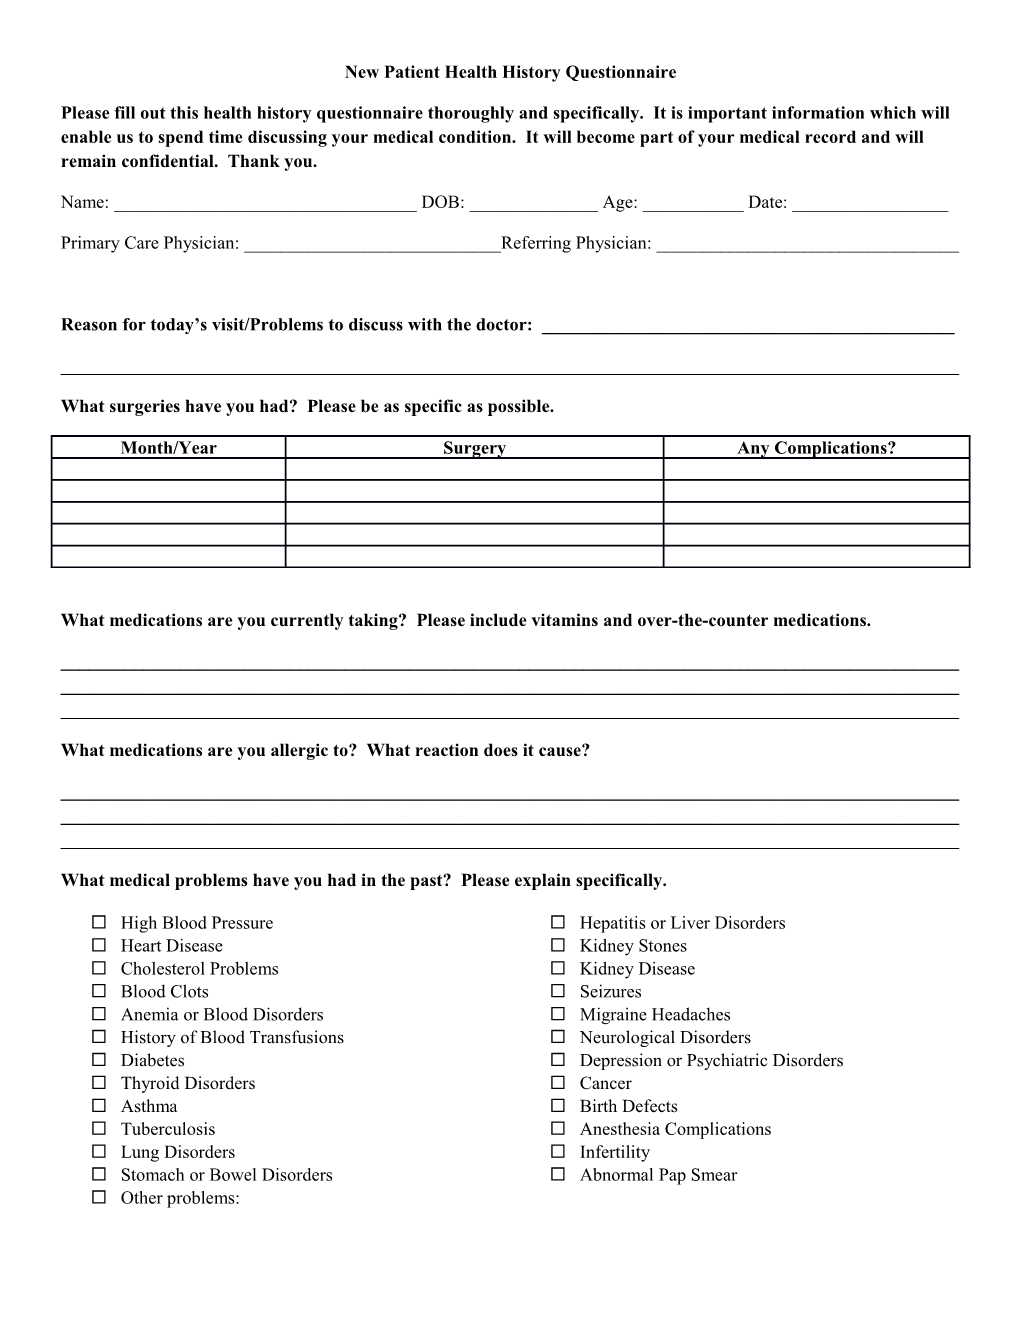 New Patient Health History Questionnaire